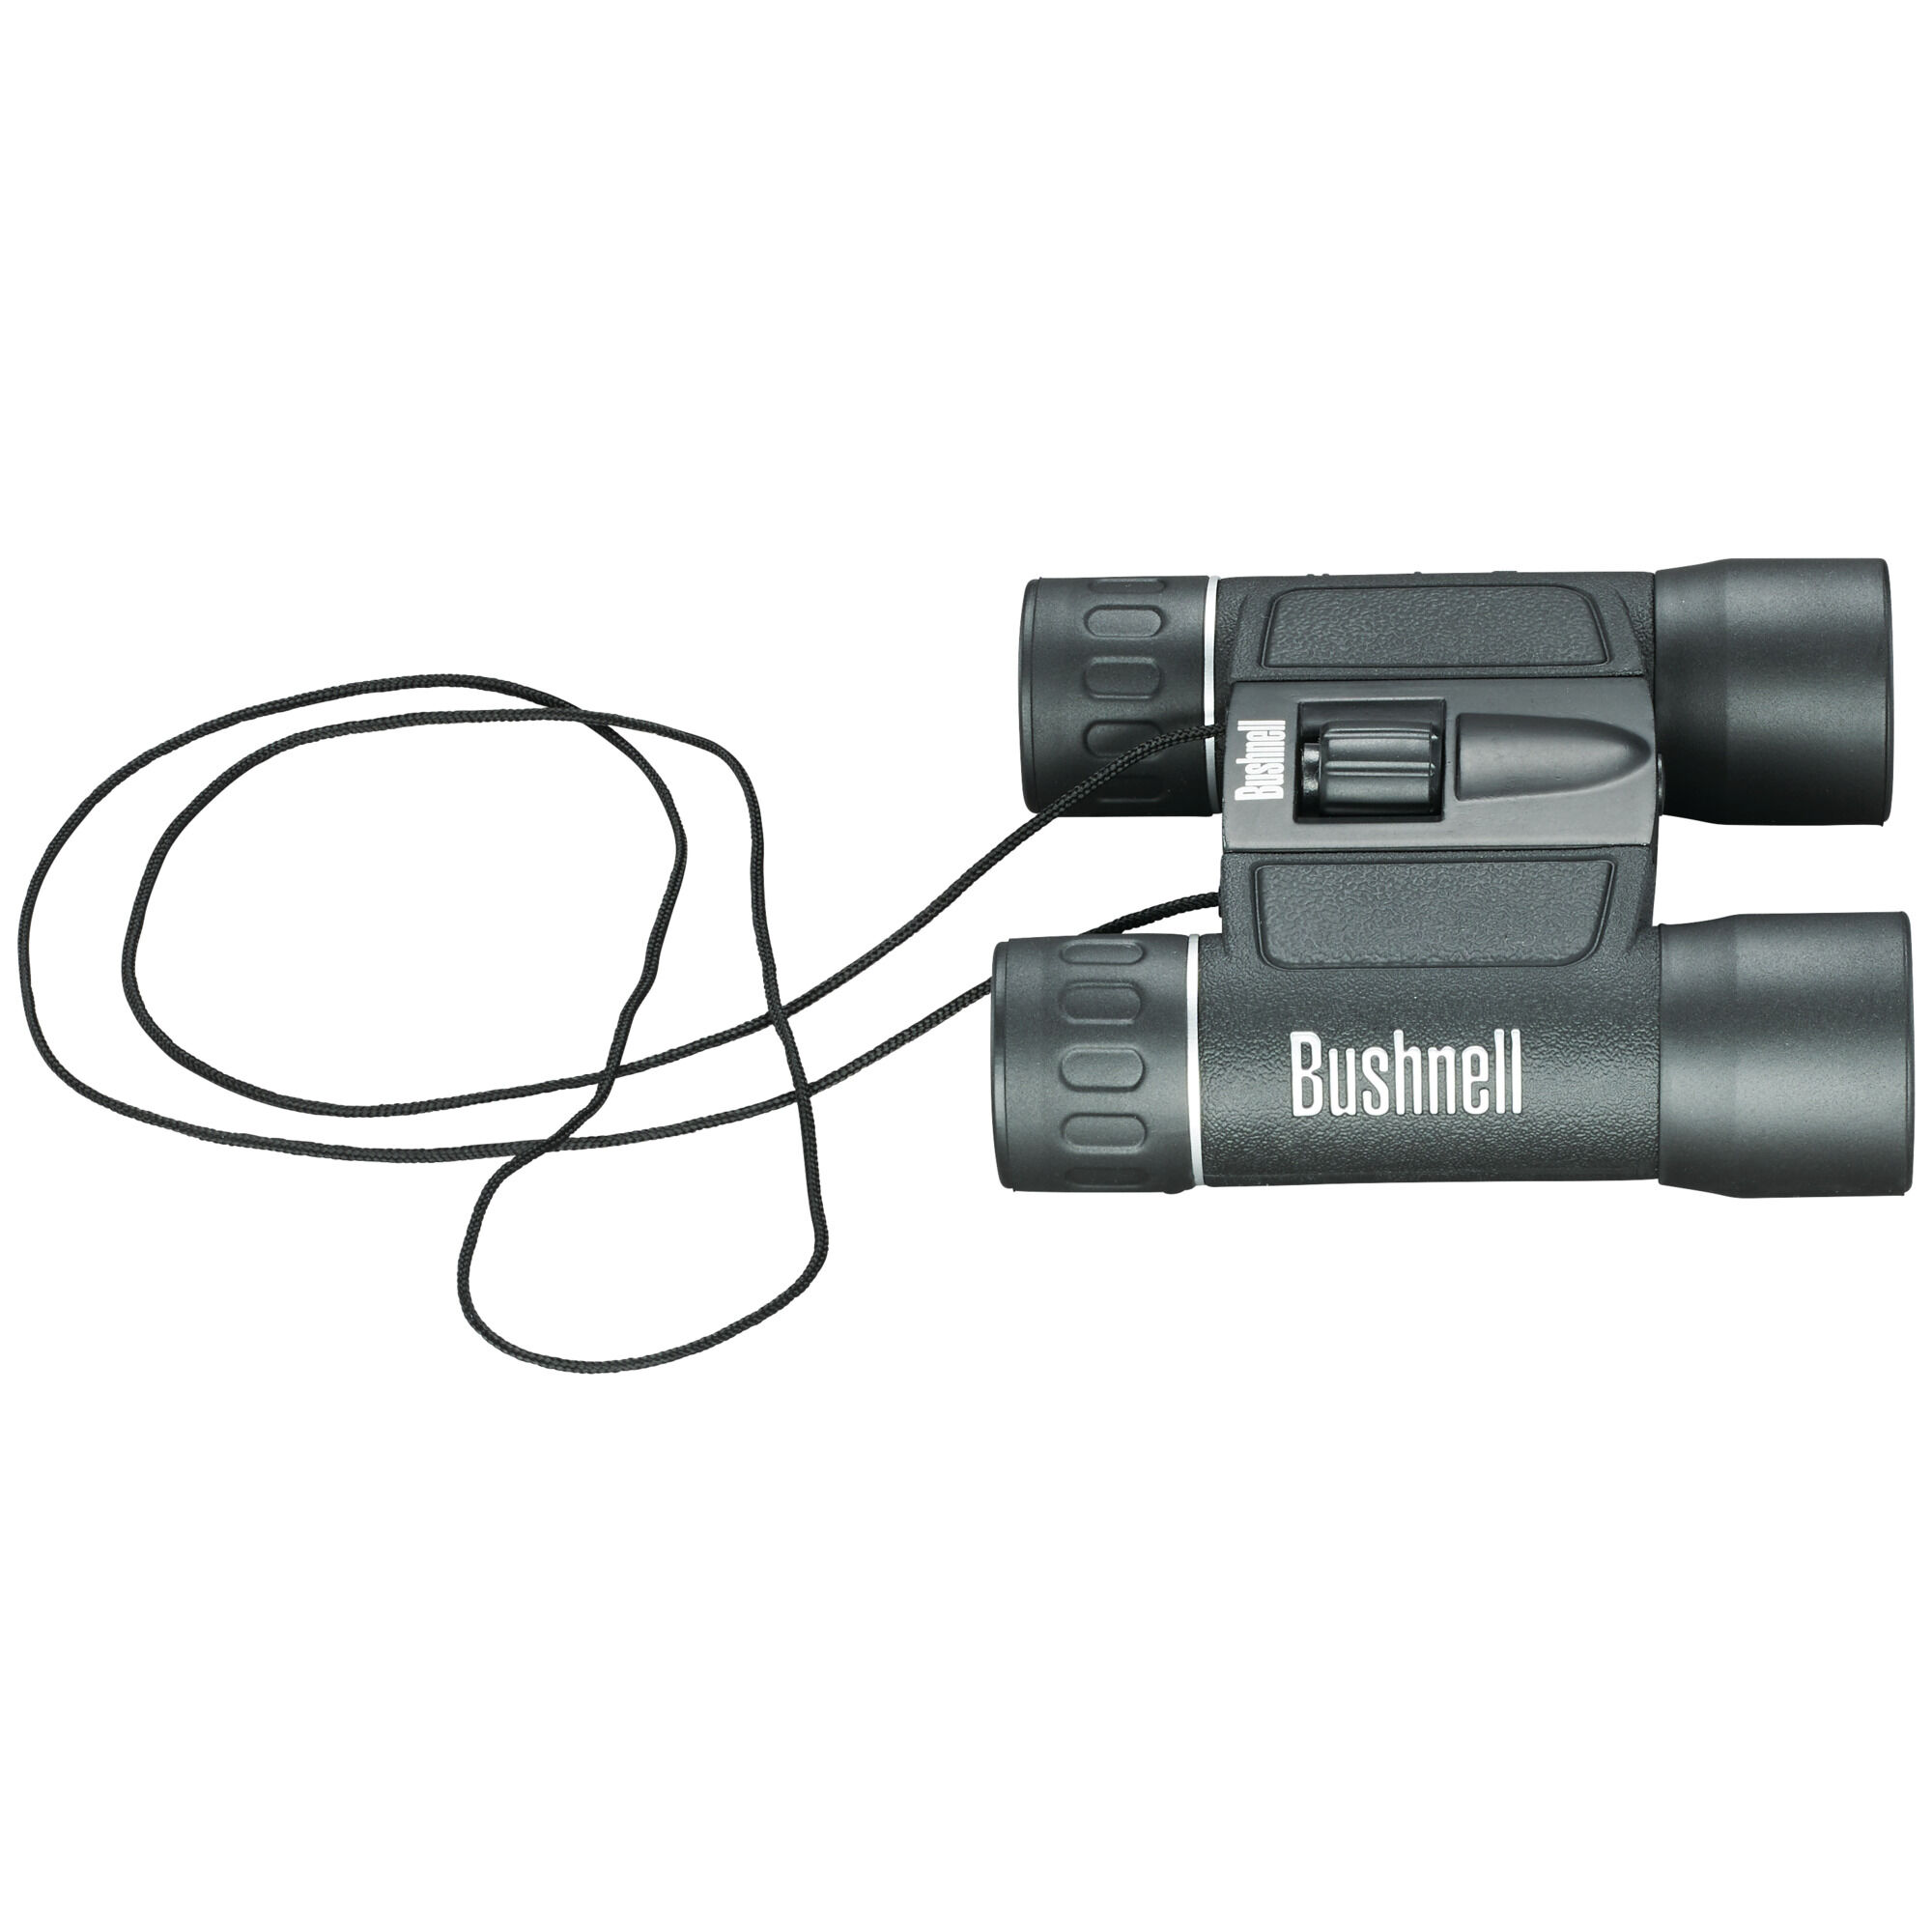 Bushnell Fernglas PowerView 8x21 